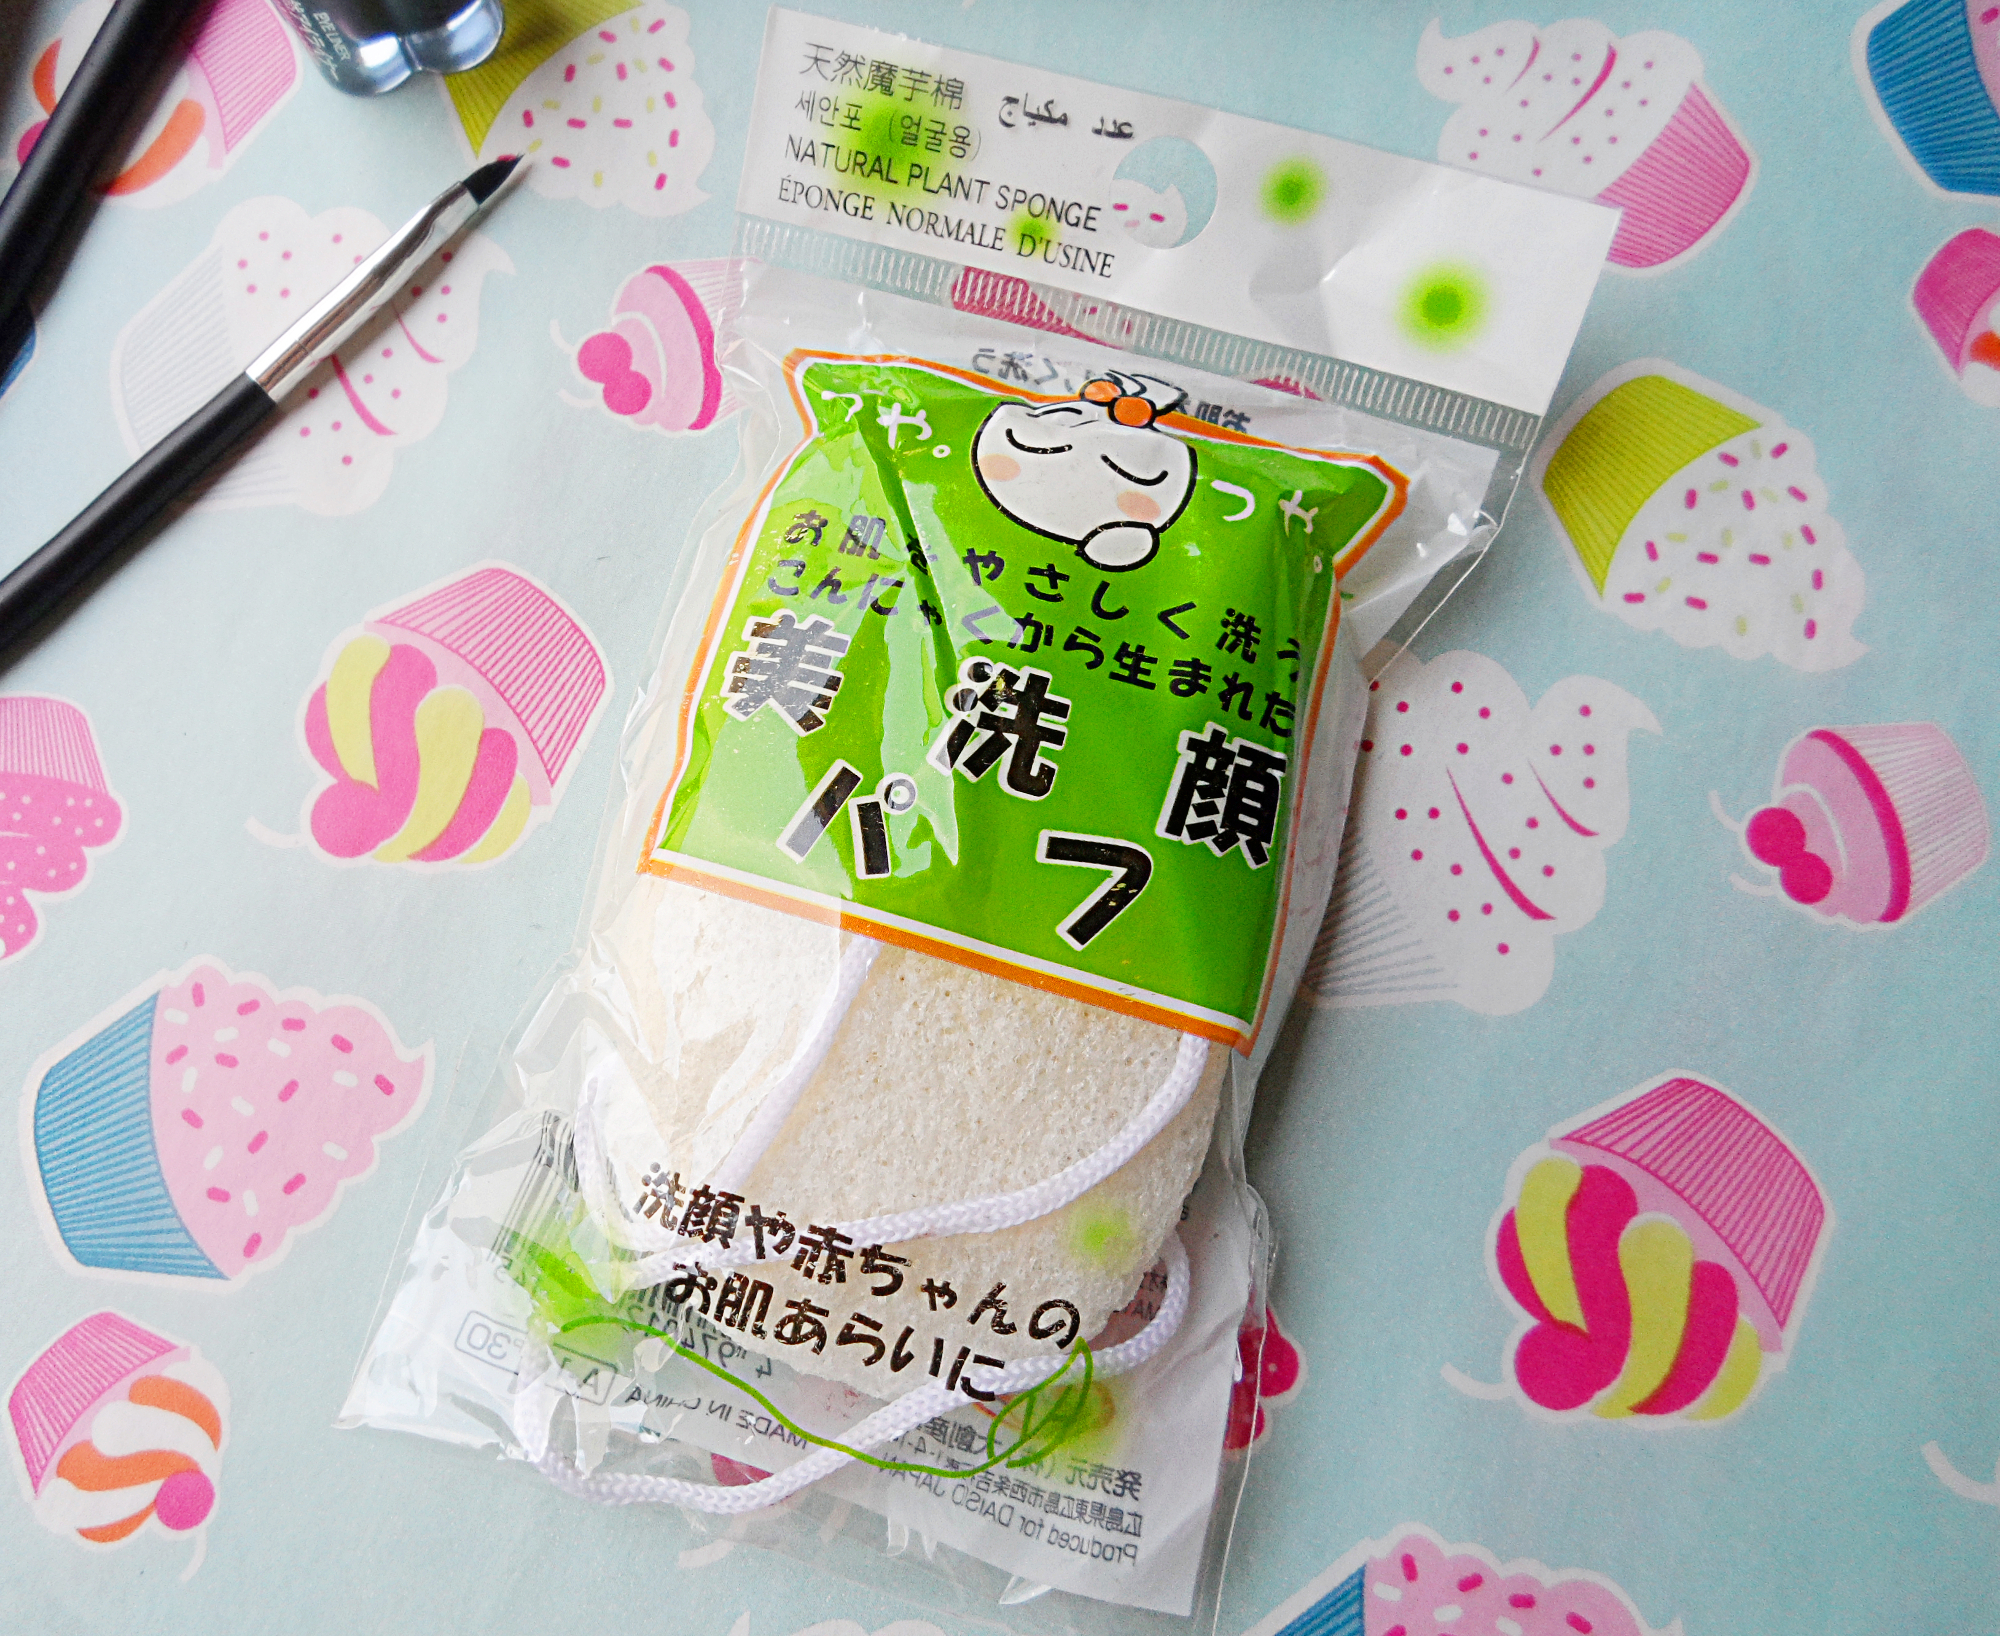 a soft, and gentle facial sponge made from natural konjak plant, a detail review with pictures and impressions by blogger